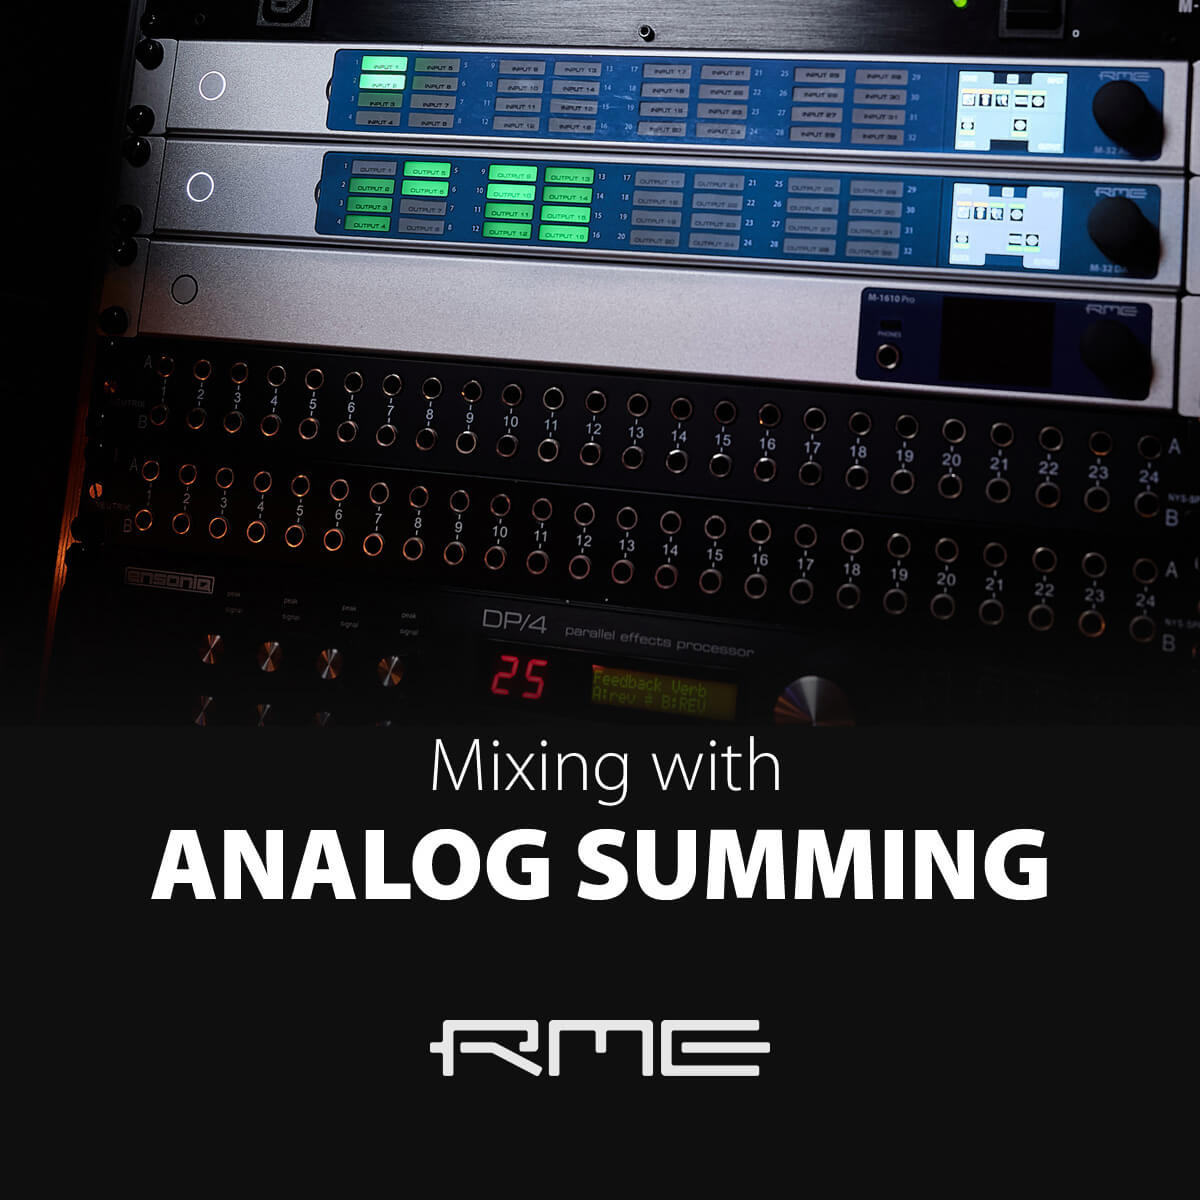 Analog Summing with the M-32 Pro